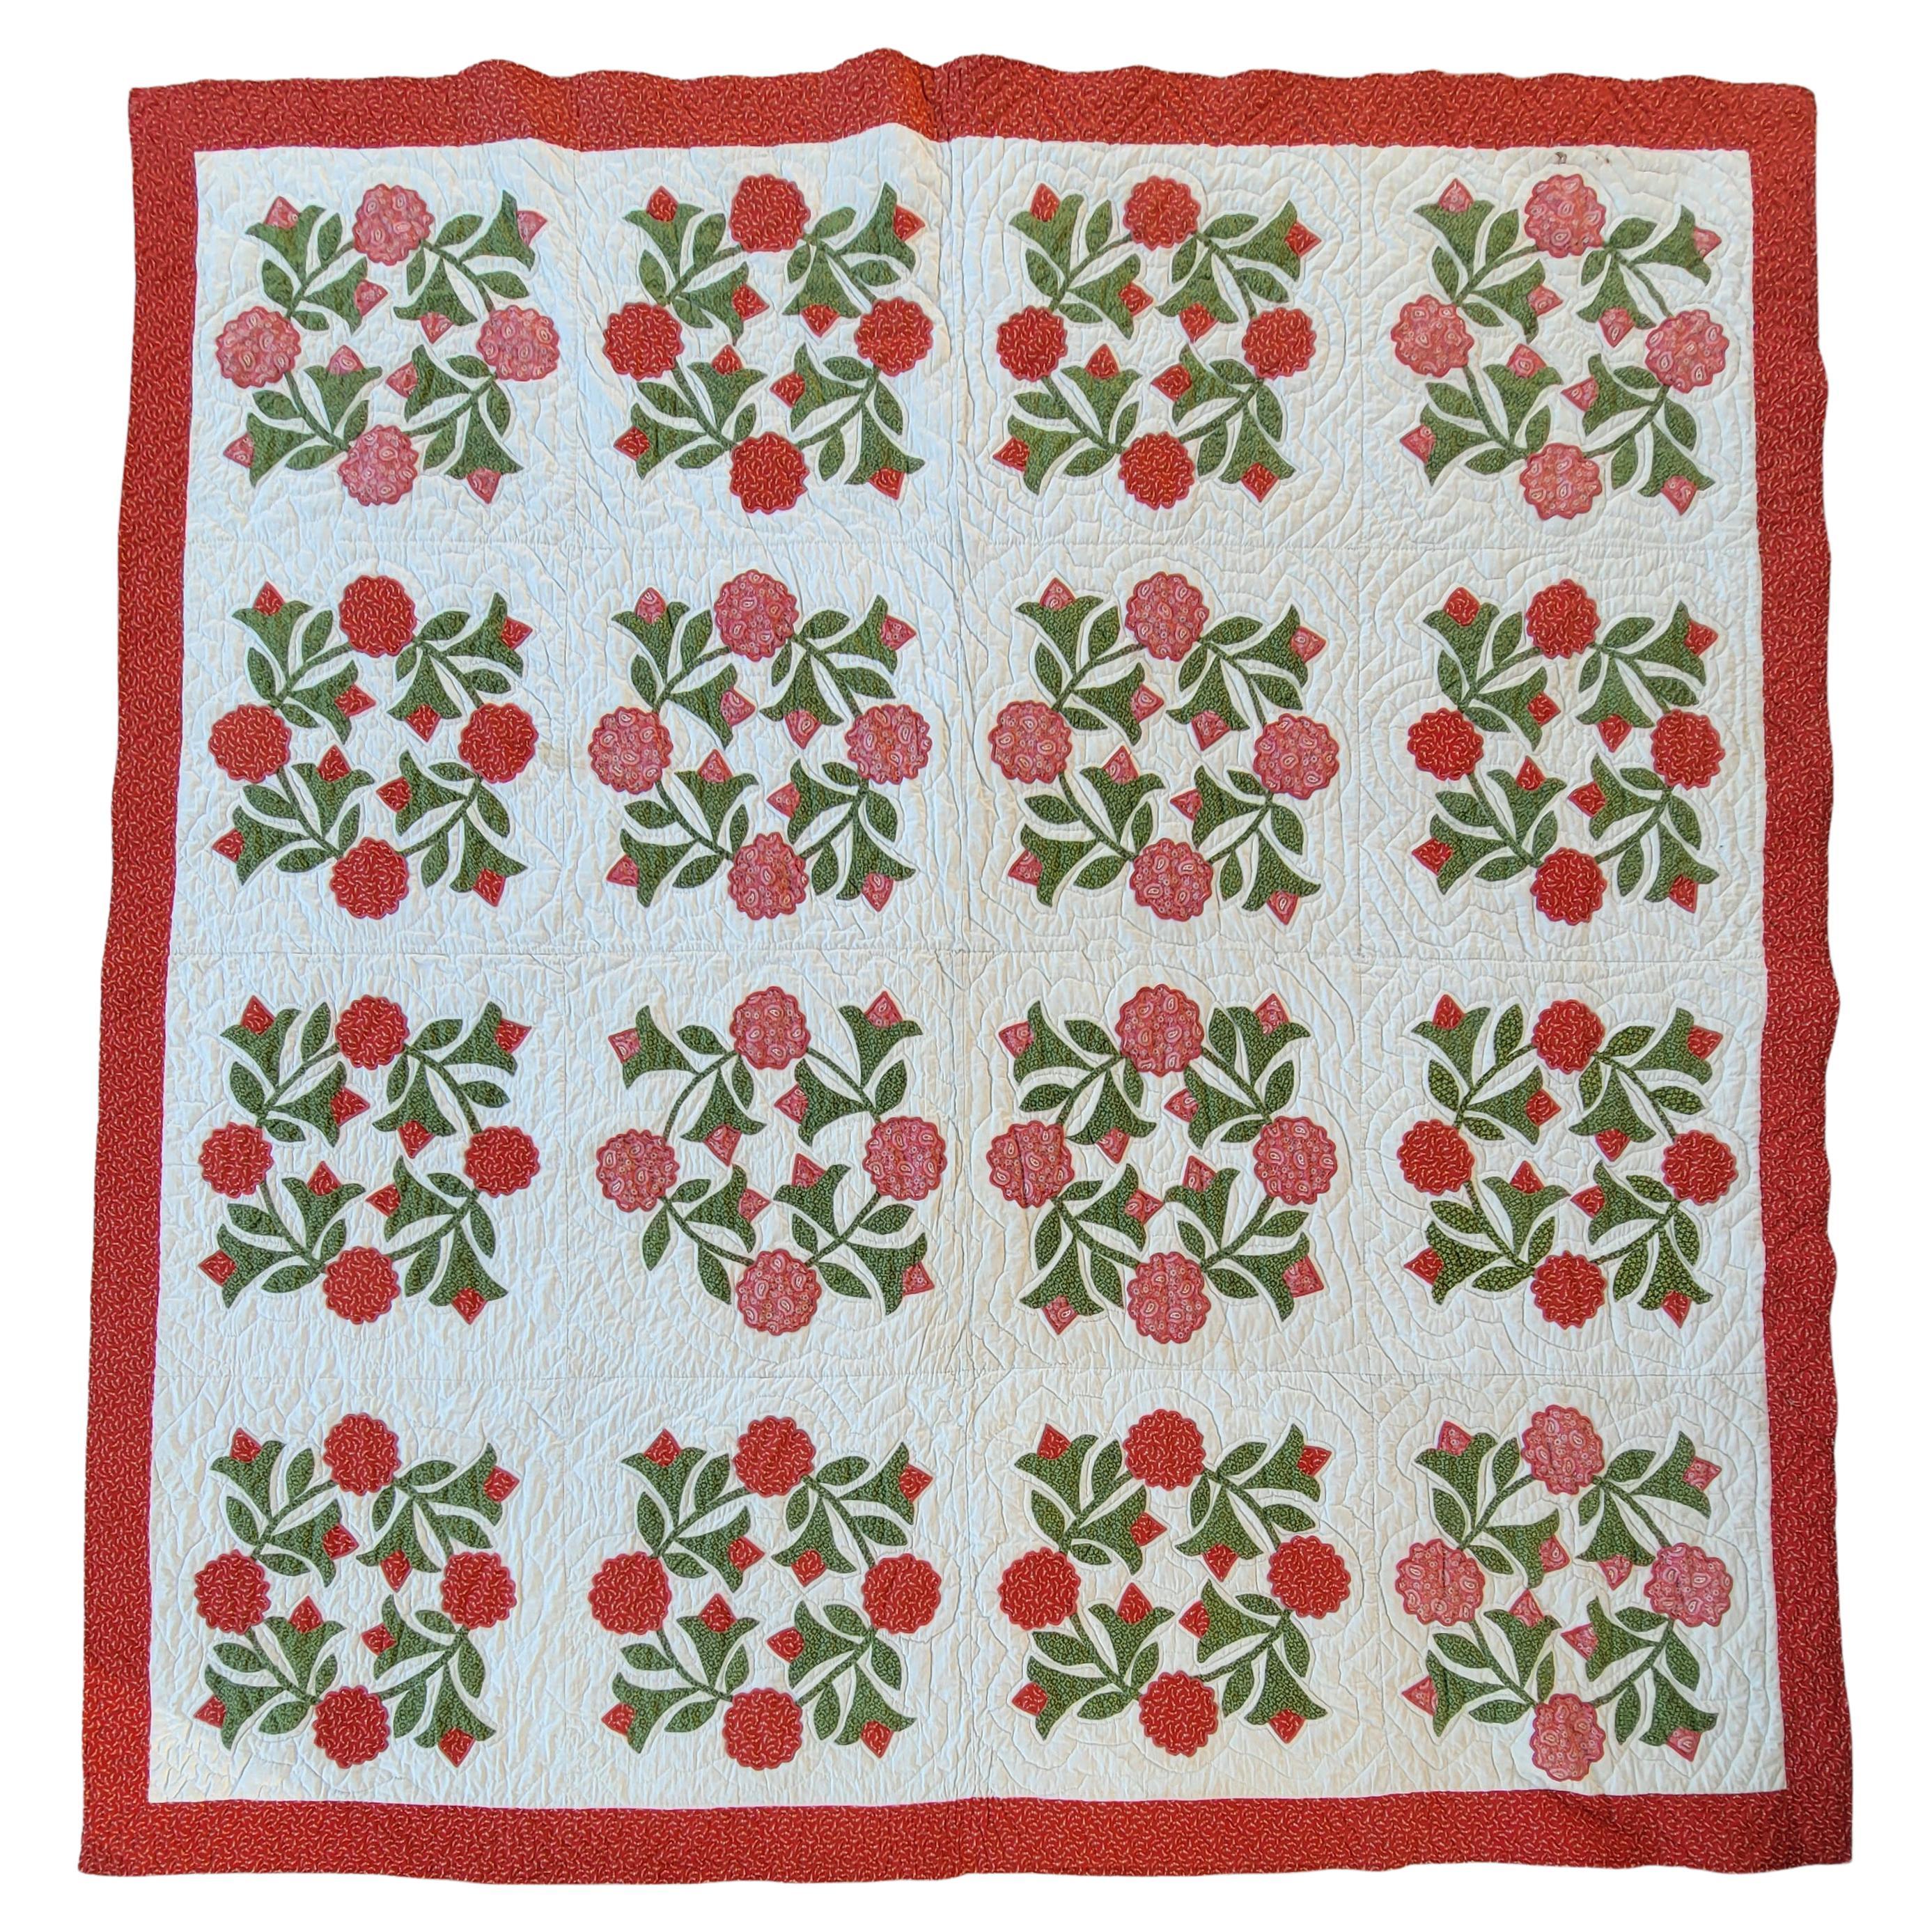 19thC Red & Green Wreath Applique Quilt For Sale